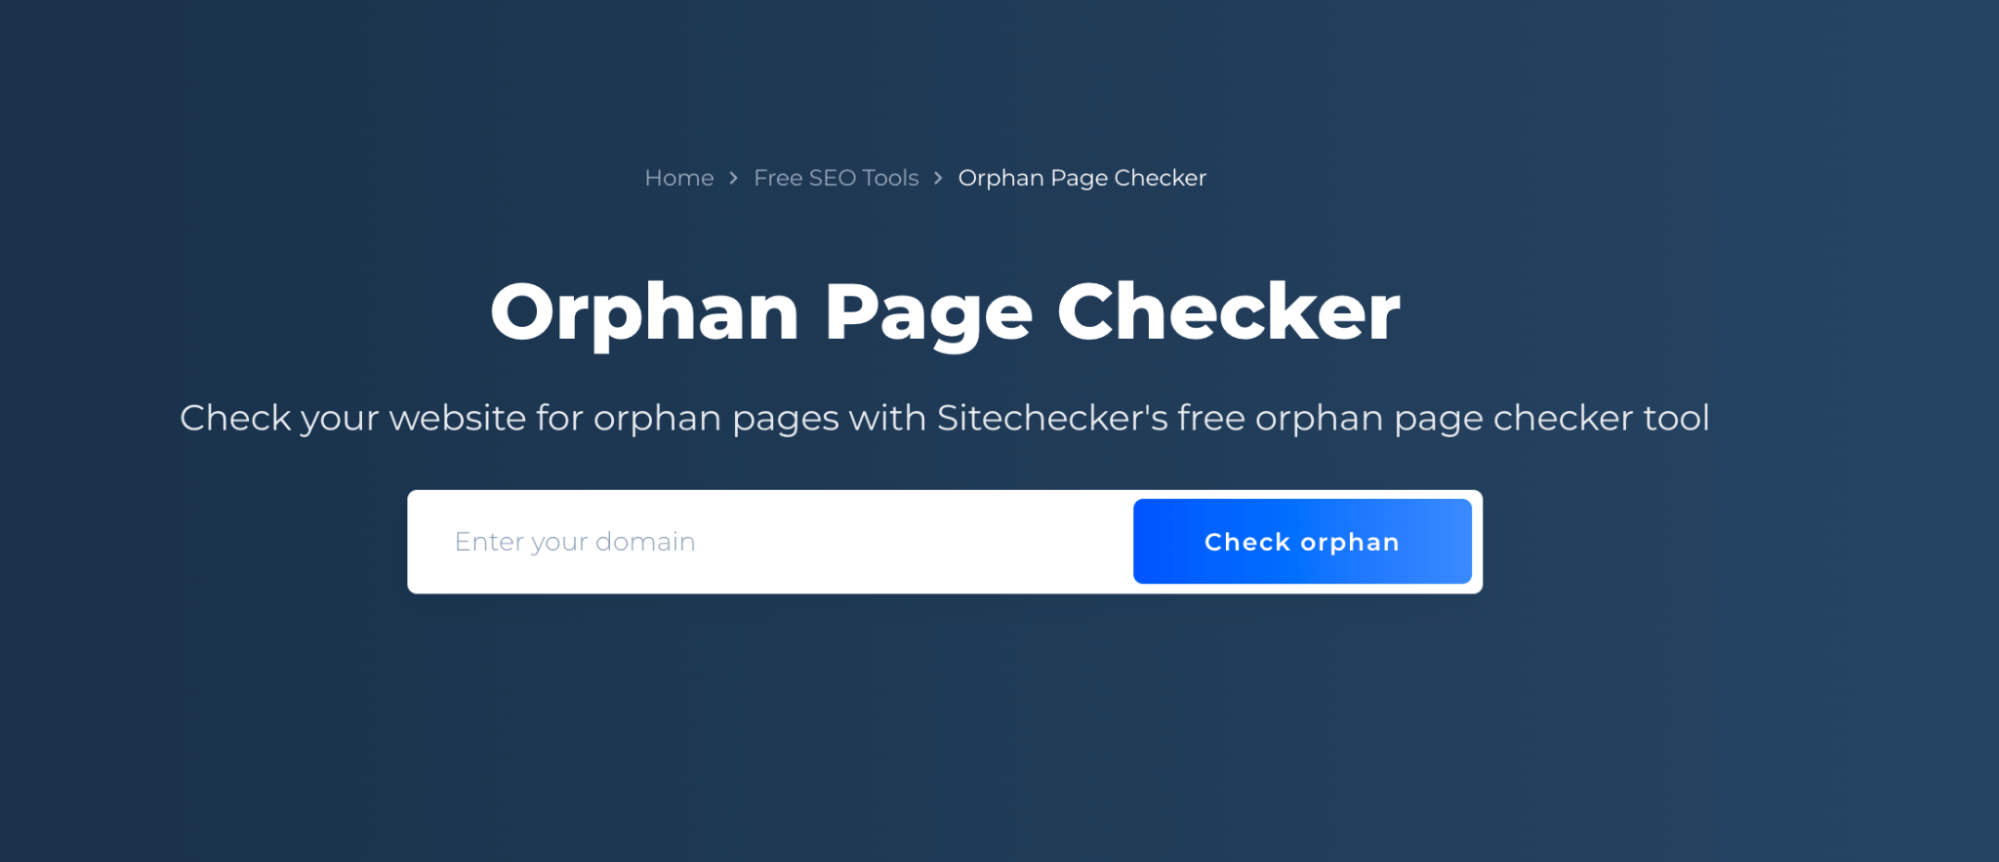 Orphan Page Checker